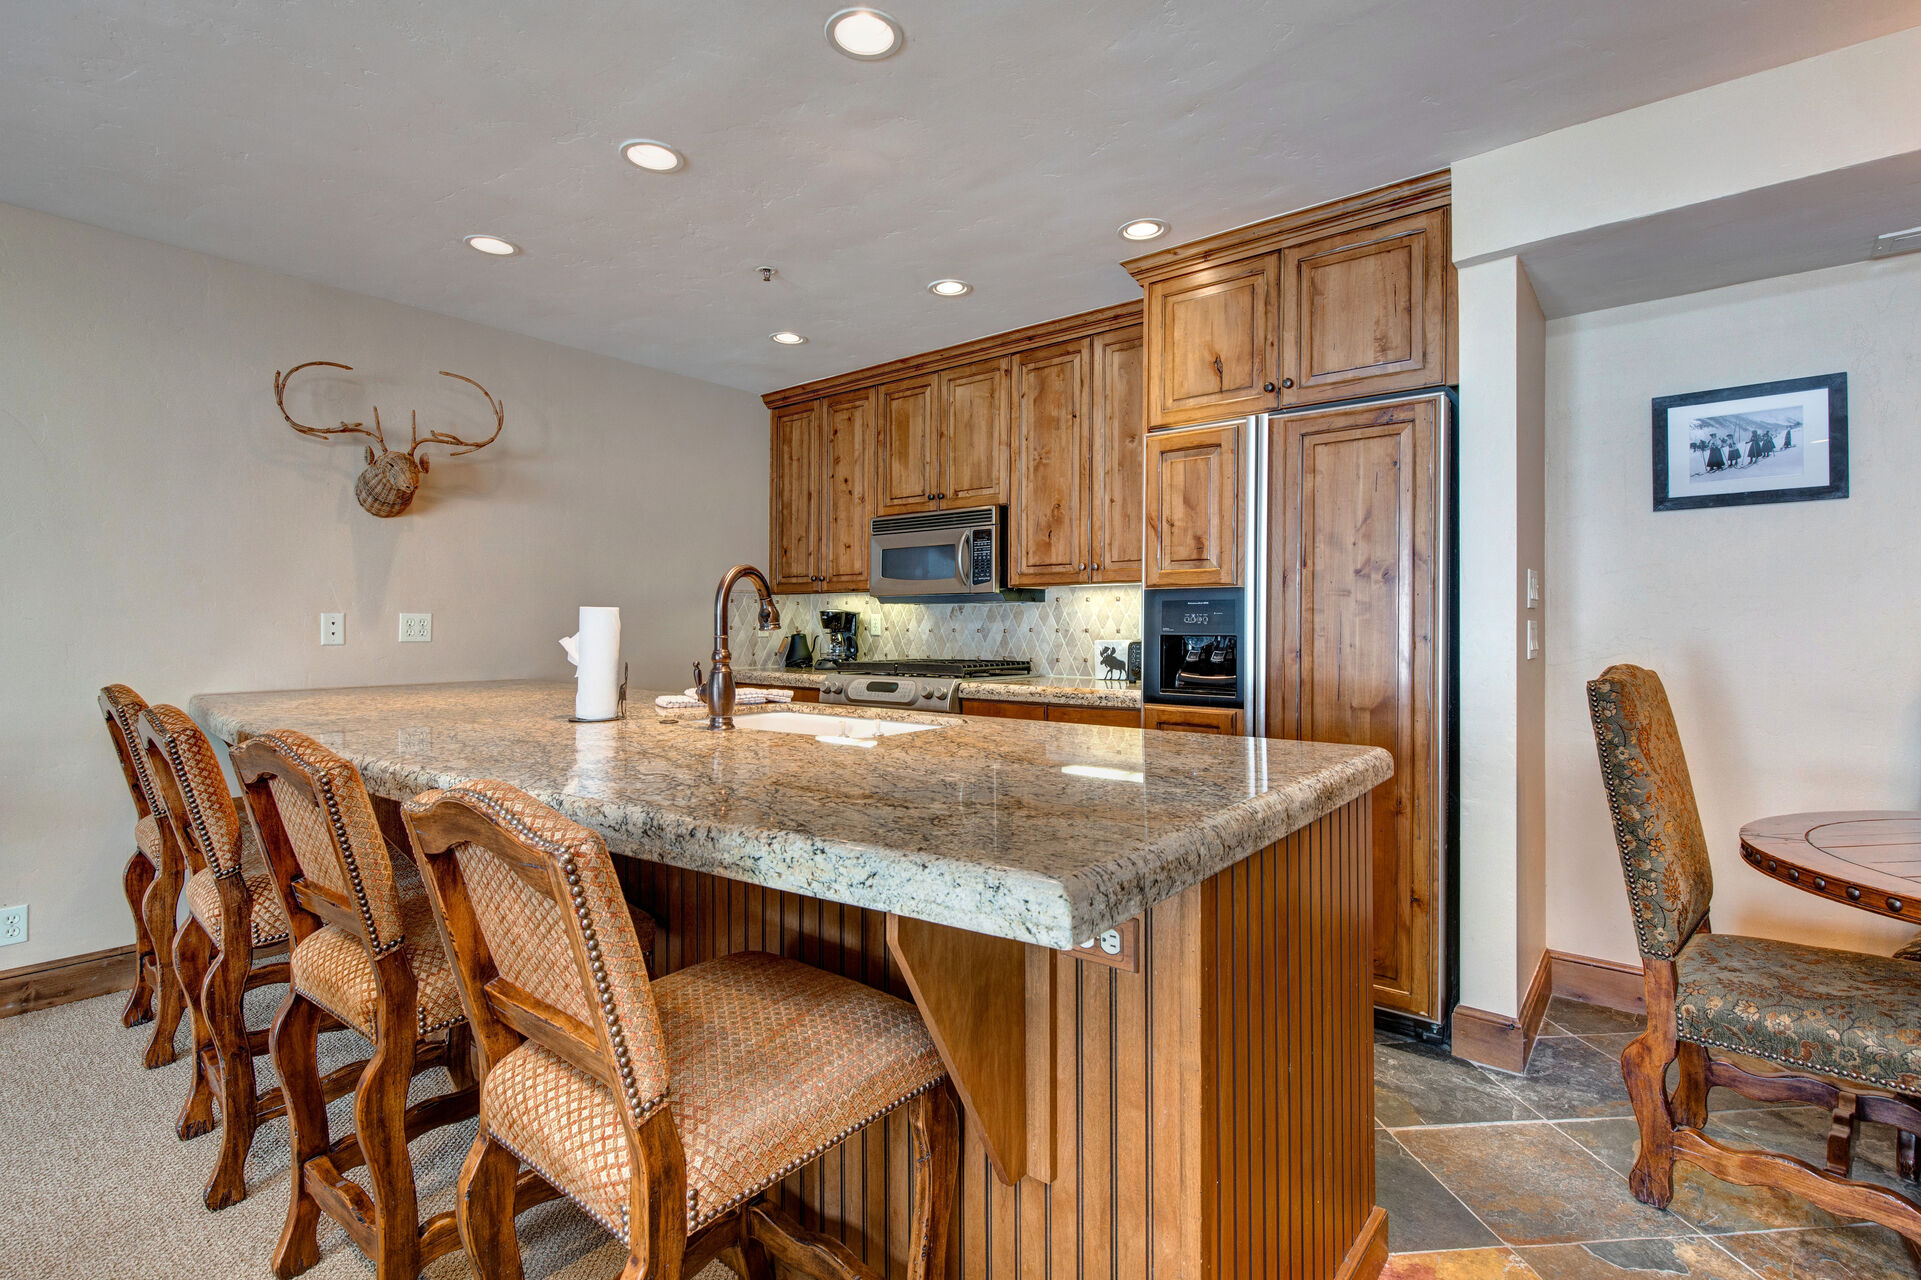 Fully Equipped Kitchen with beautiful stone countertops, stainless steel appliances, ample space, built-in water and ice dispenser, and bar seating for four